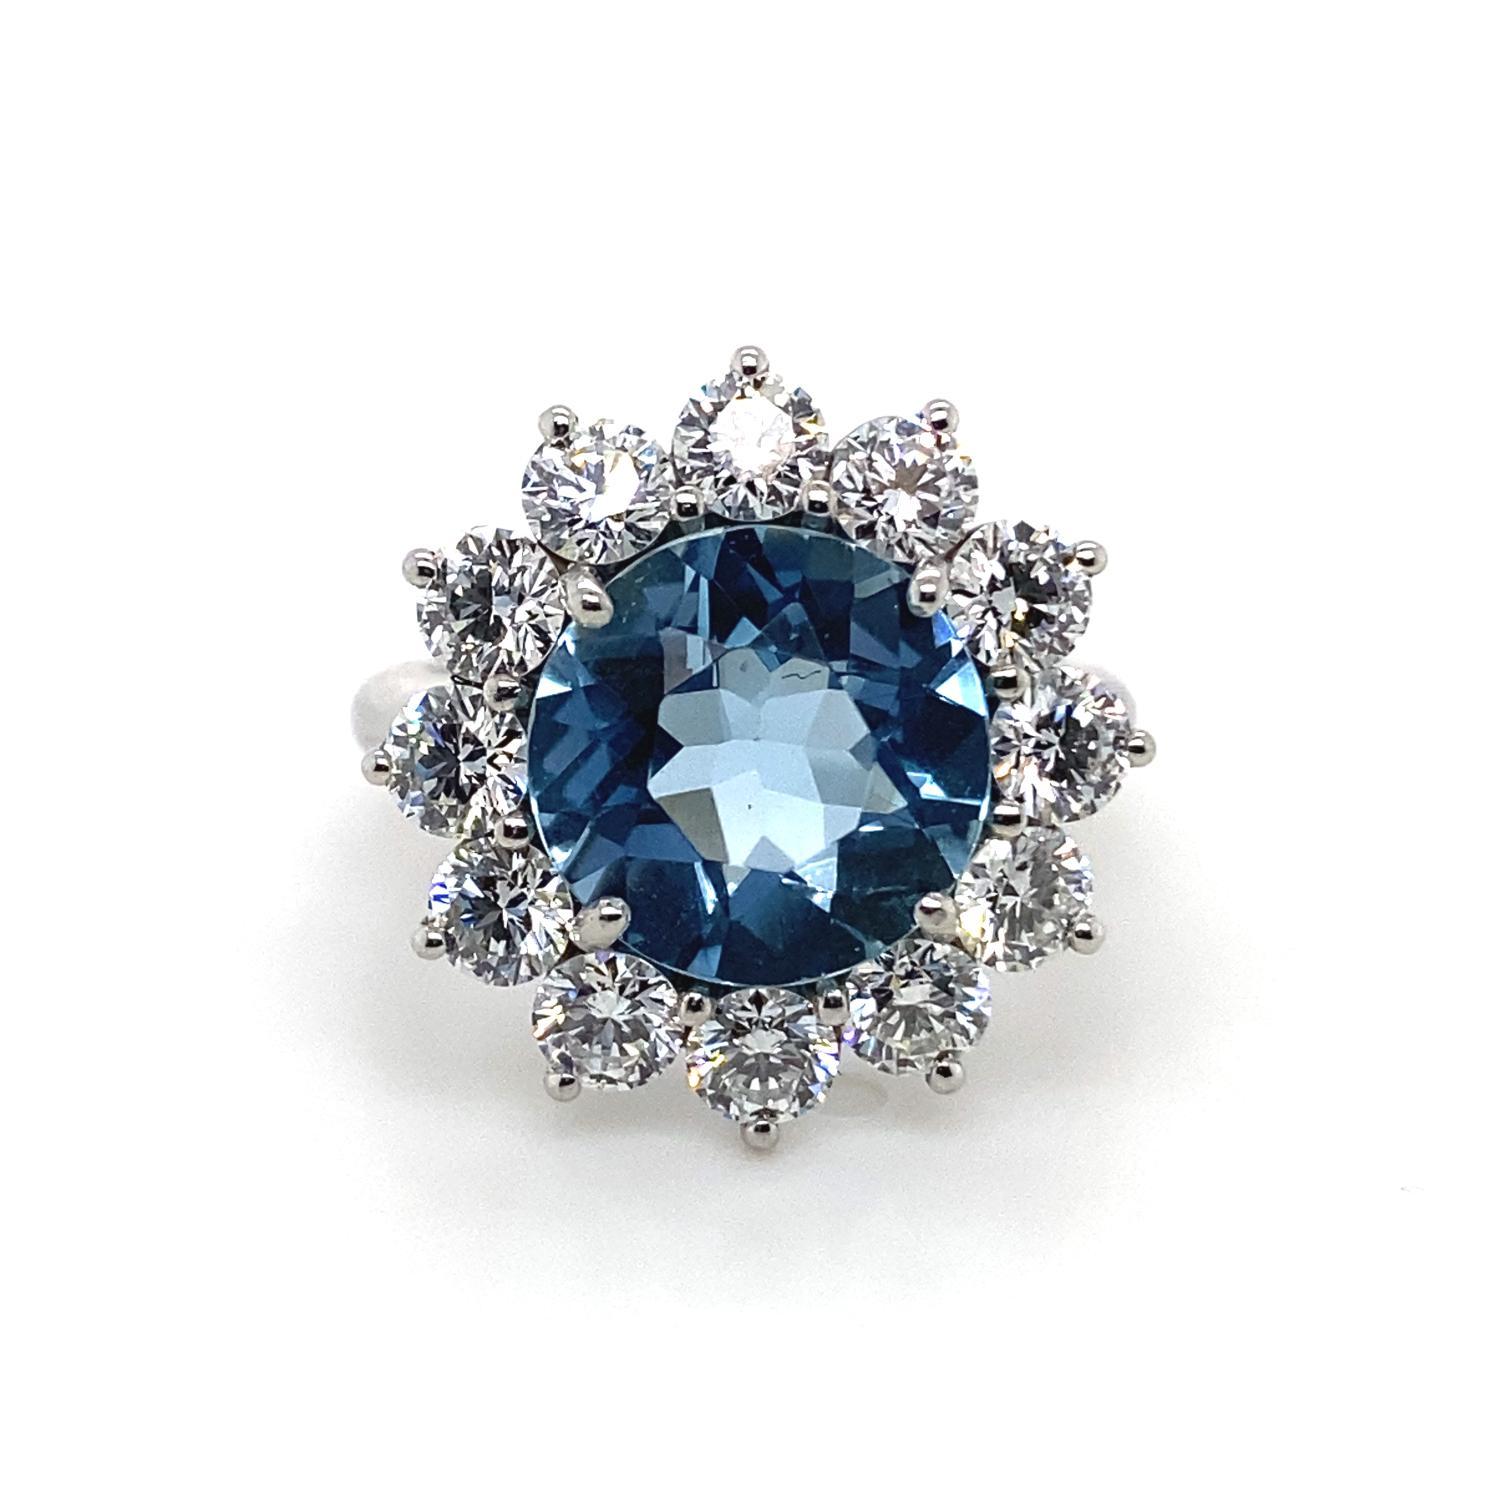 A T. Foster & Co aquamarine and diamond cluster platinum engagement ring.

This piece is centrally set with a 2.28ct round cut aquamarine, surrounded by a cluster of 12 round brilliant cut diamonds totalling 1.44cts assessed as H/I colour, VS1